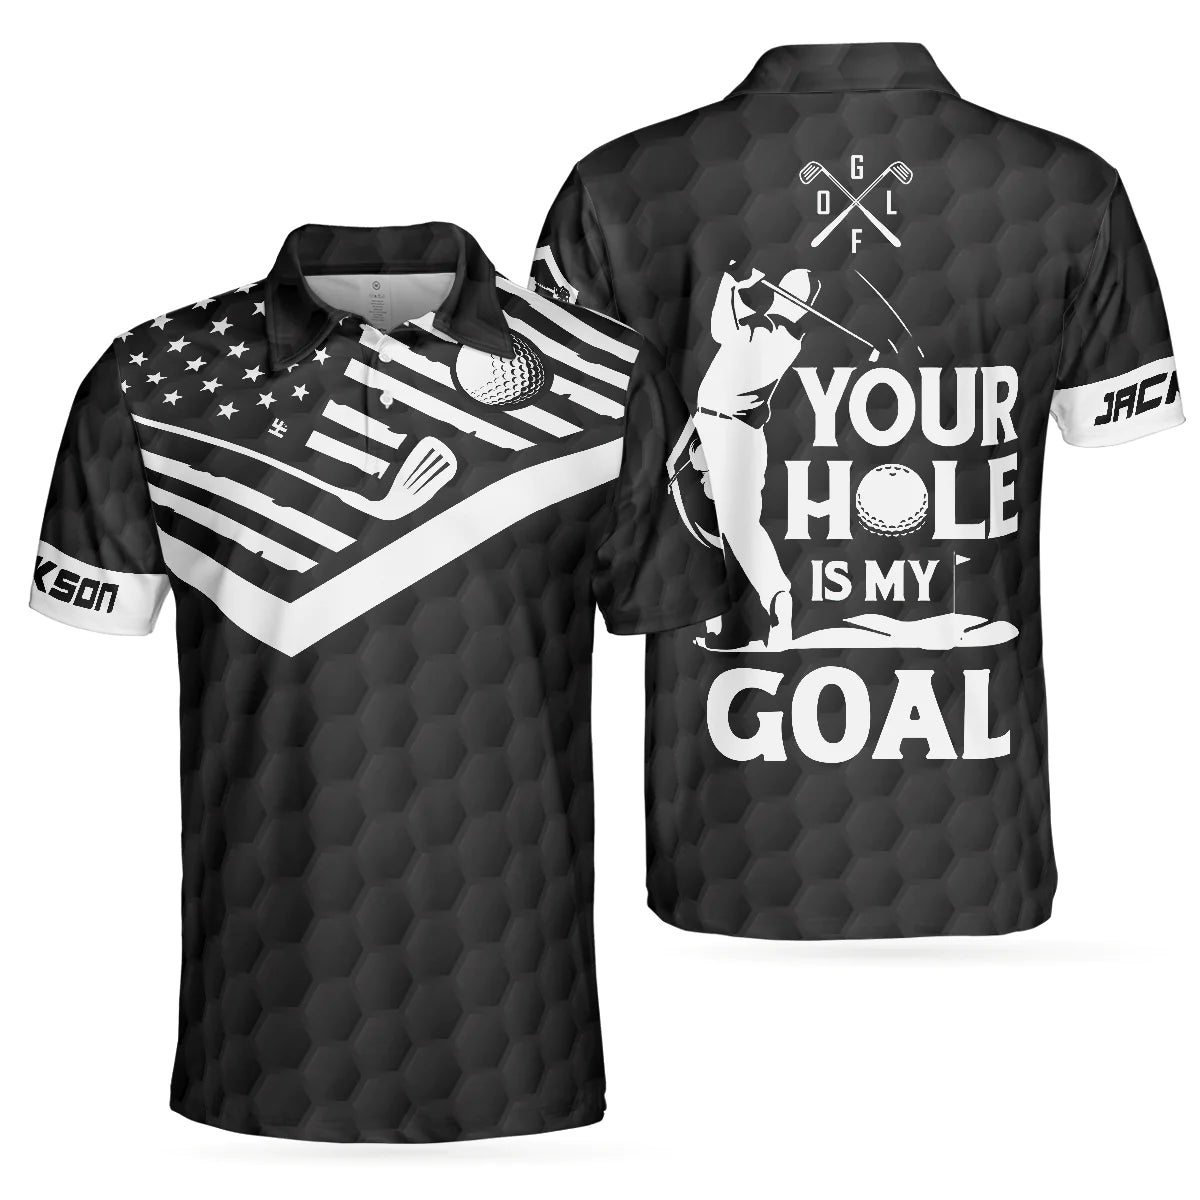 Customized White American Flag Polo Shirt – Perfect Golf Shirt for Men with “Your Hole Is My Goal” Design – GP433